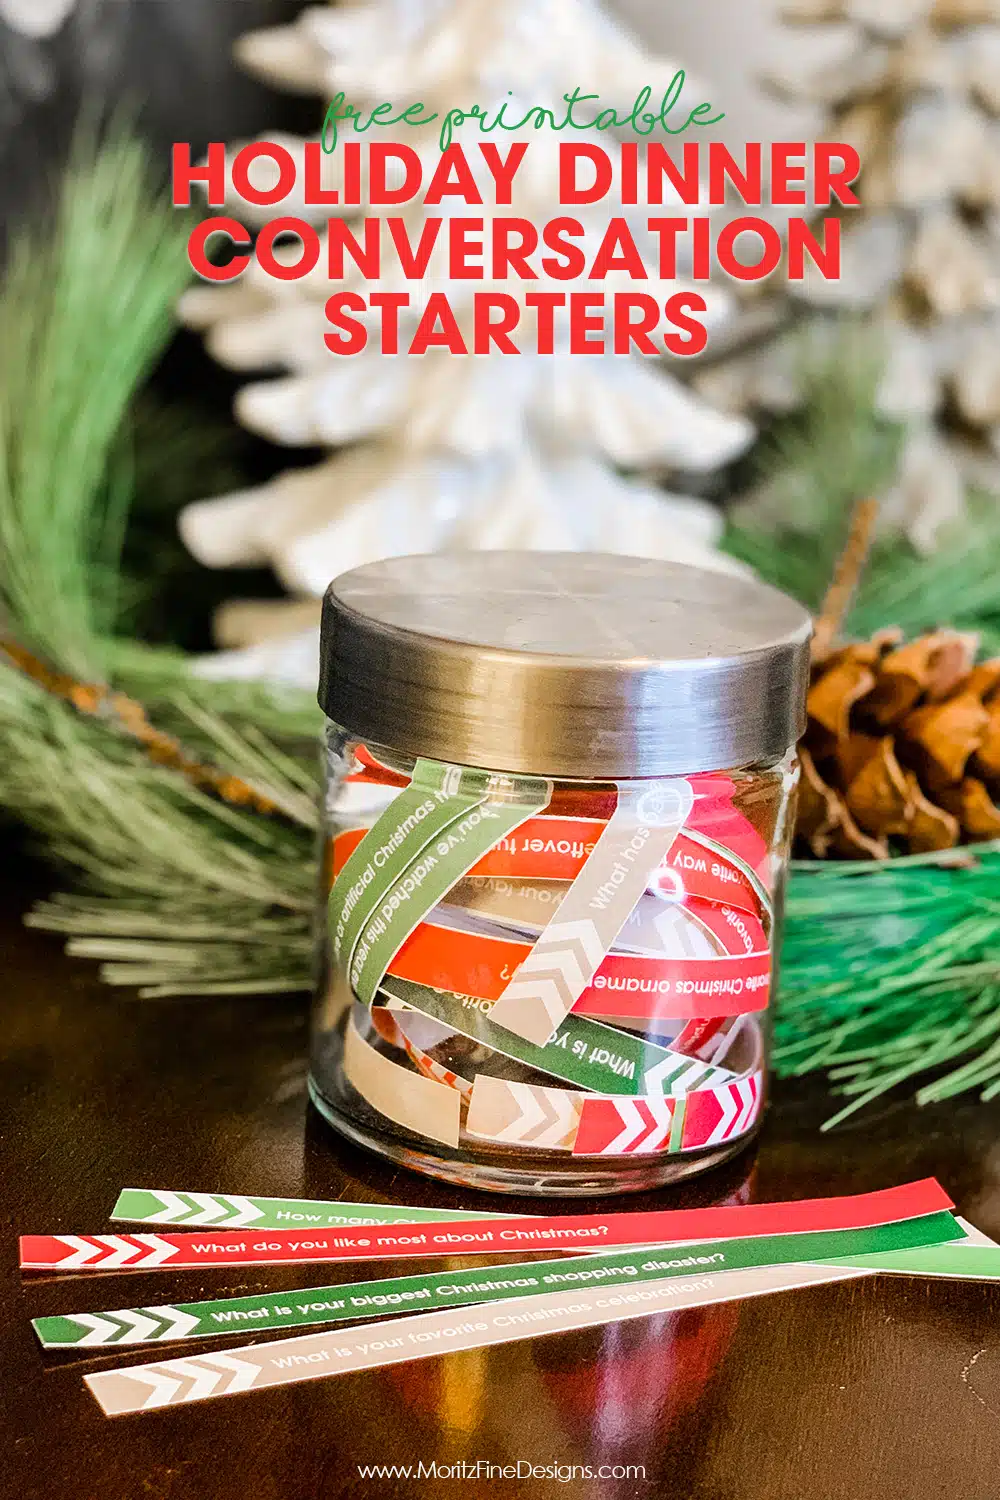 Skip the awkward holiday dinner conversation--use these fun Holiday Dinner Conversation Starters to enable a healthy and fun dinner discussion.